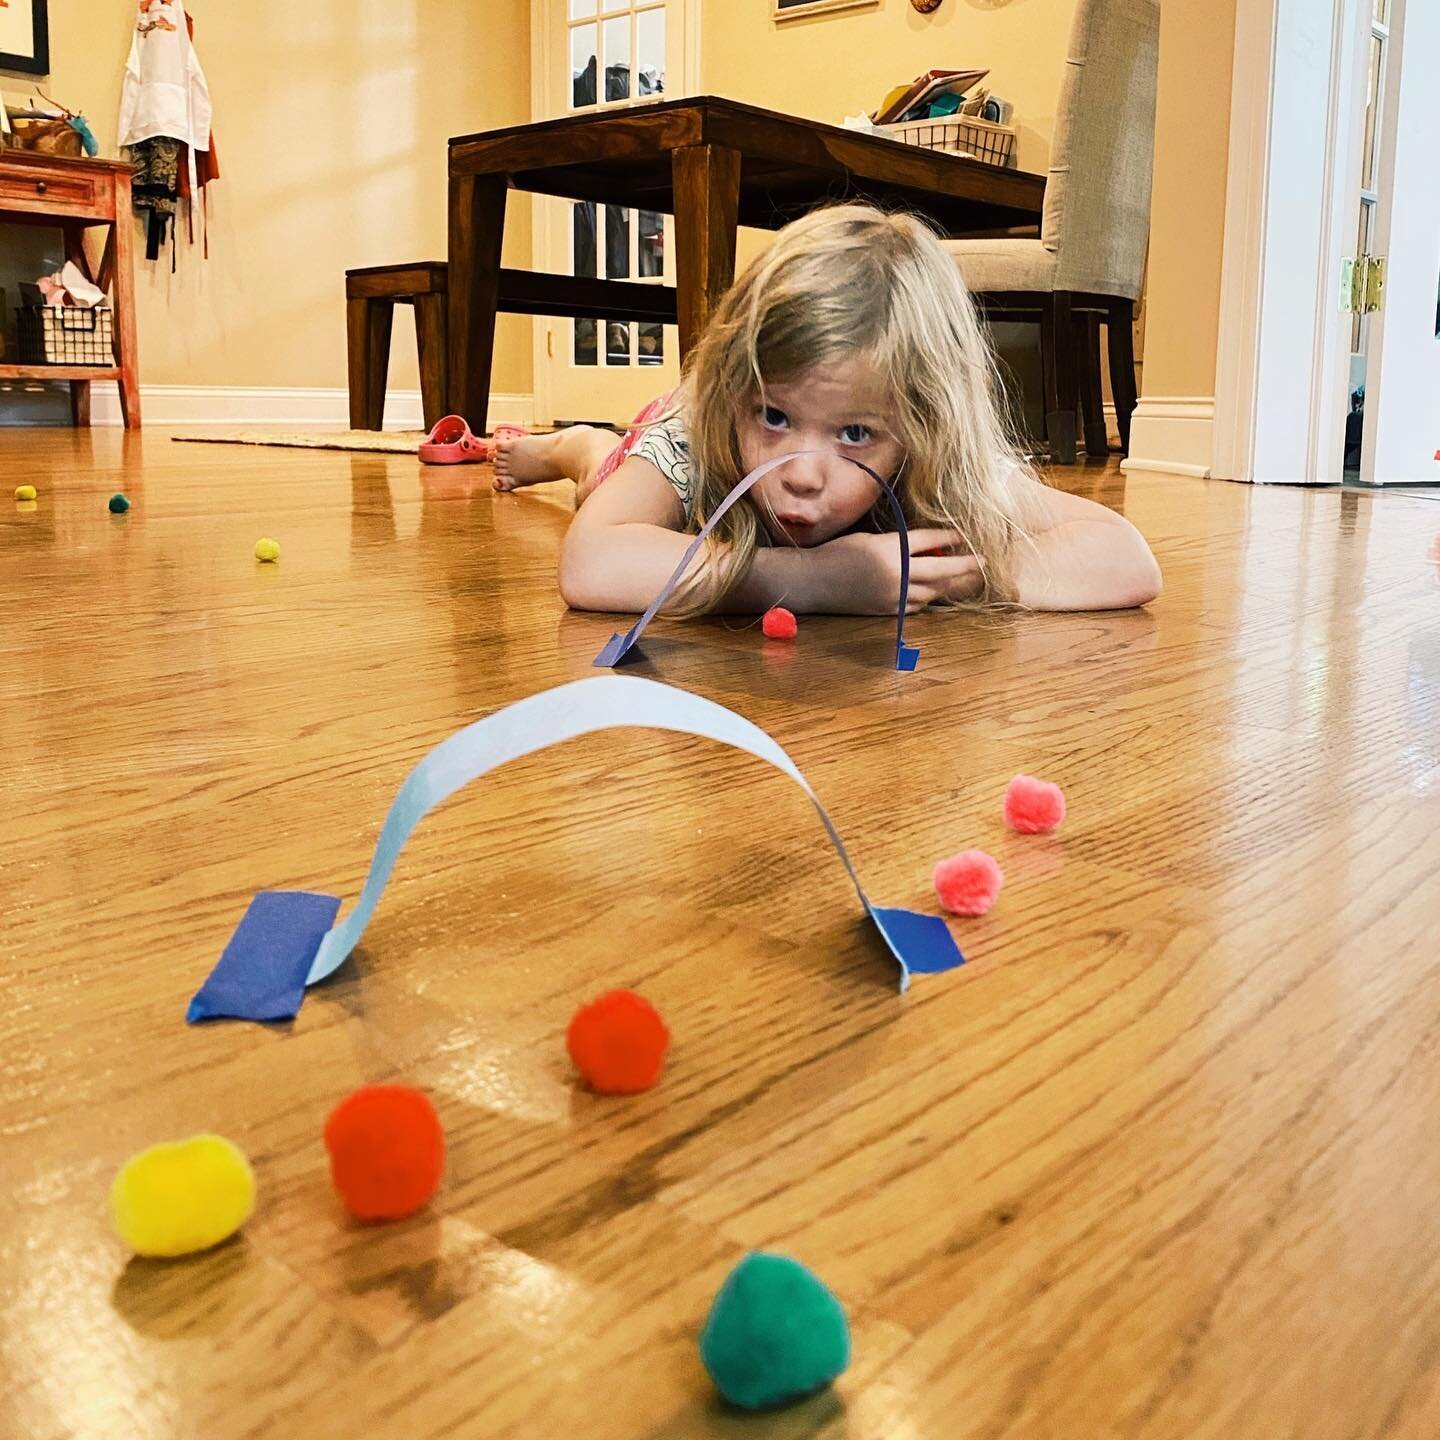 Kids getting overwhelmed with e-learning? Try this brain break breathwork activity. 
.
Cut out strips of paper and tape to the floor to make paper tunnels. Have kids lie on their tummy and blow colored pom poms (cotton balls work too) through the tun